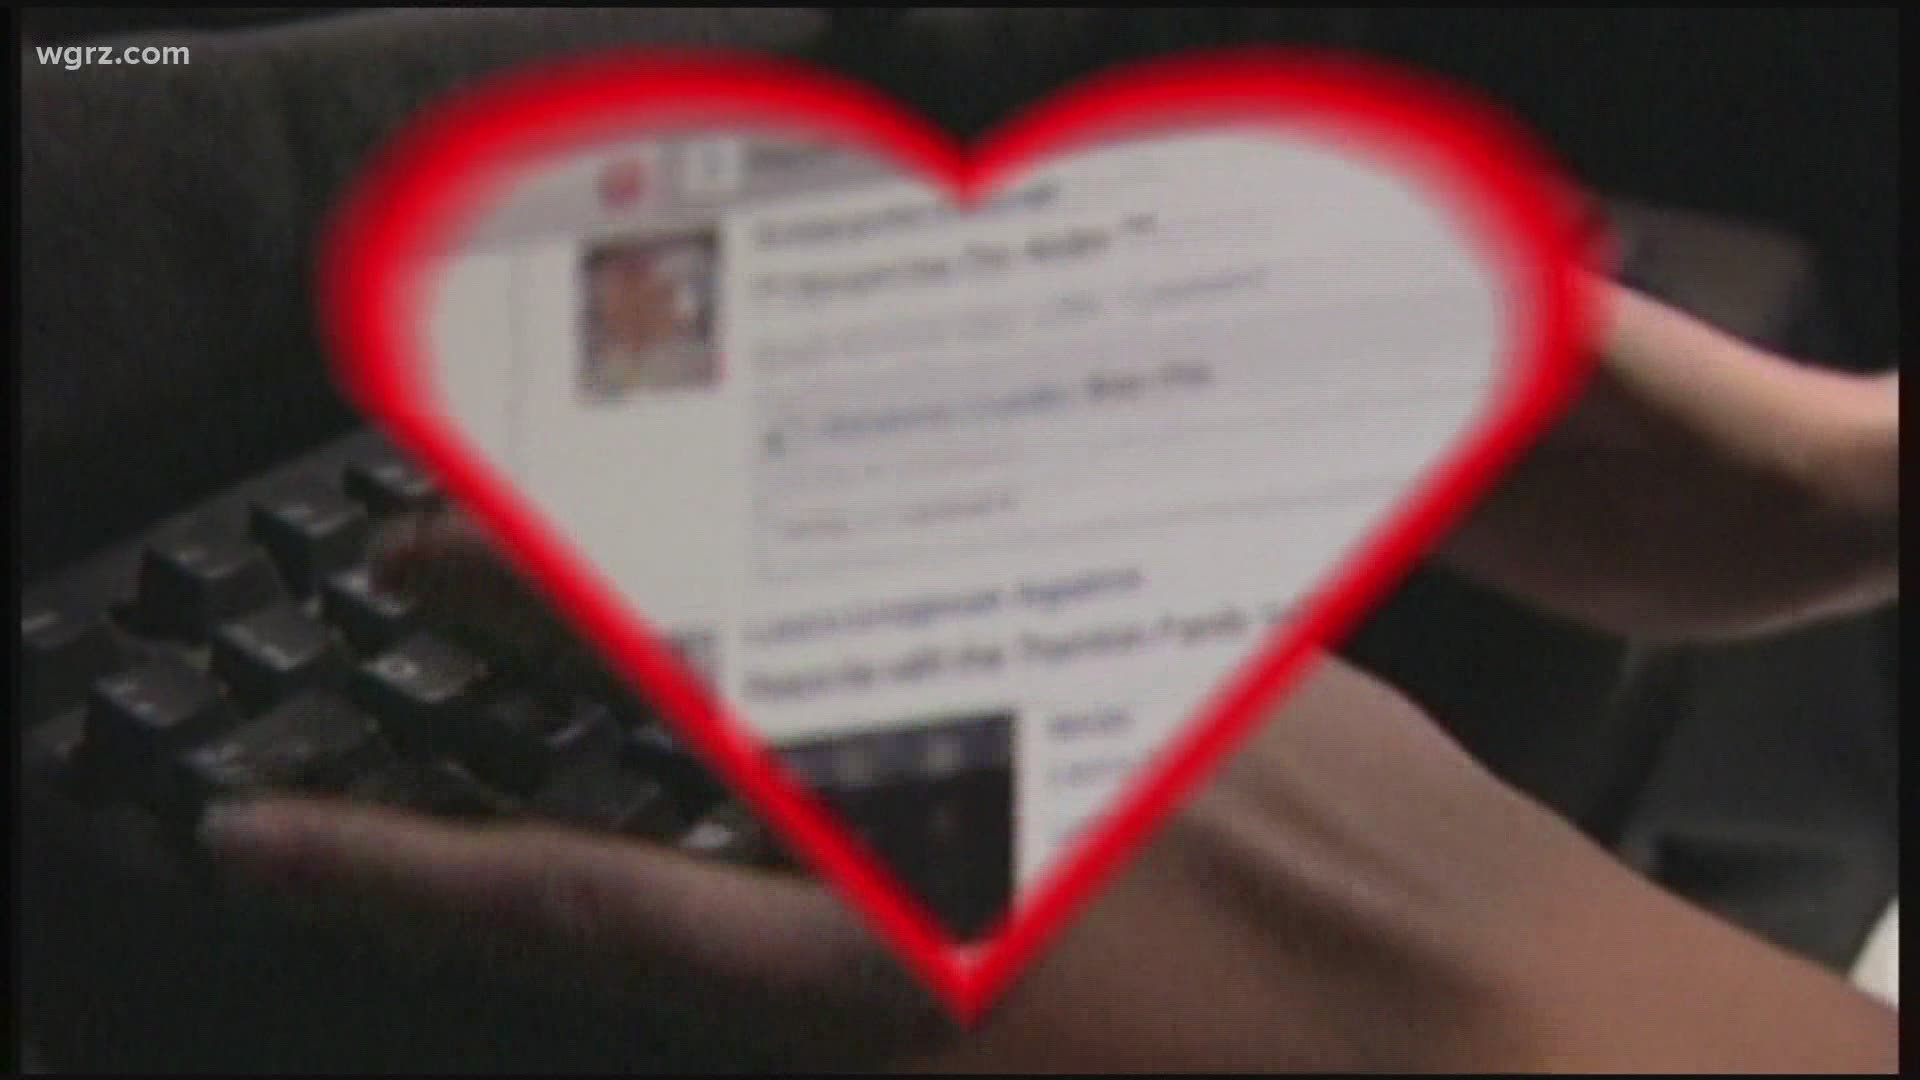 BBB warns about new twist on romance scam